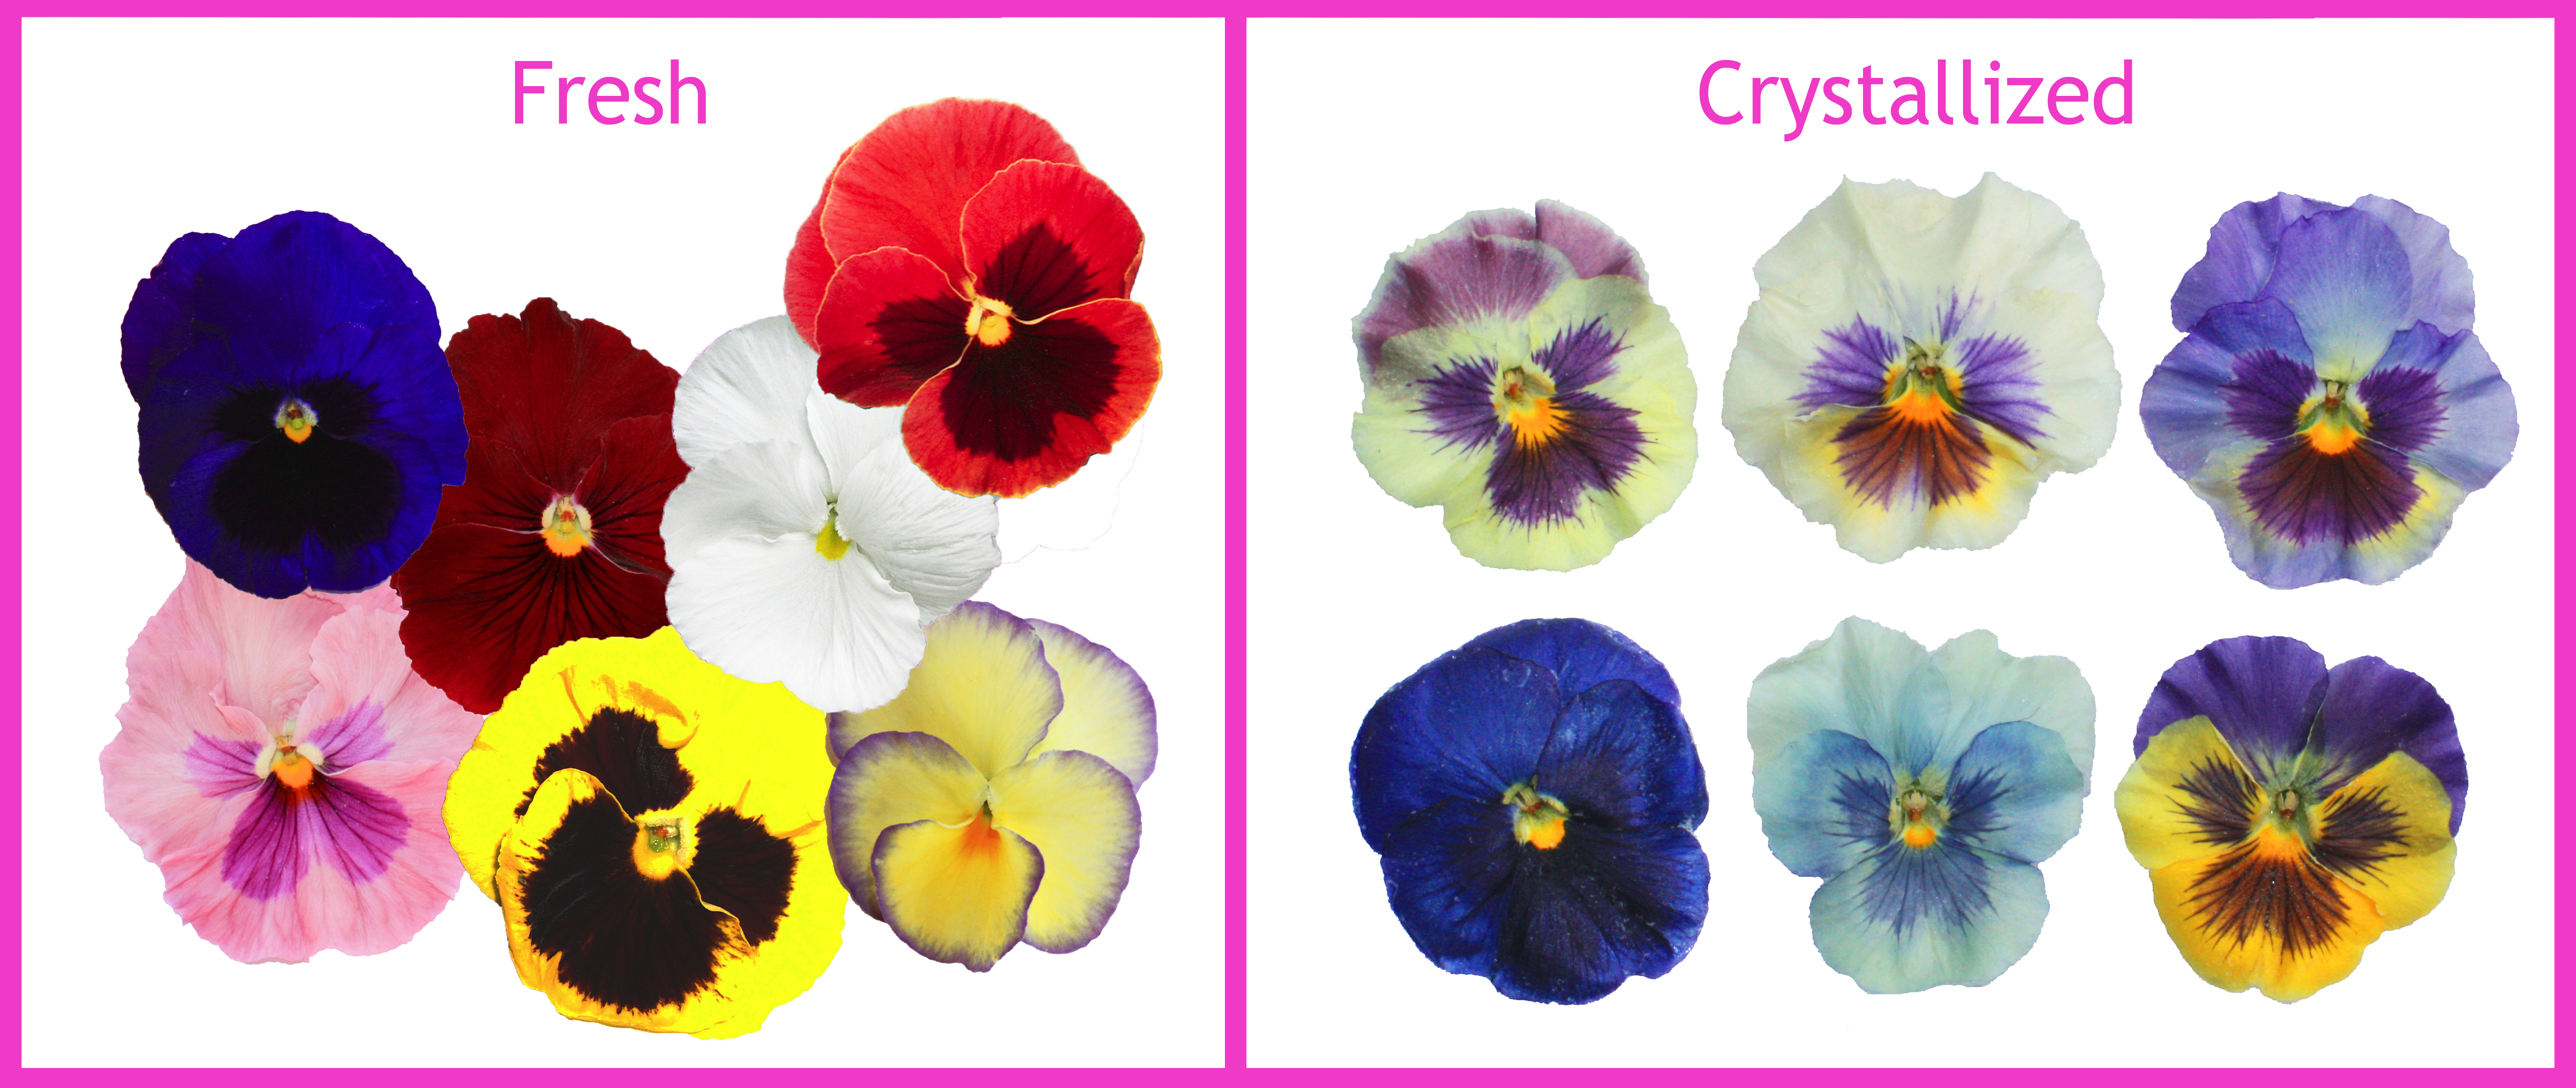 Edible Flowers to Embellish Your Valentine's Day Menu!